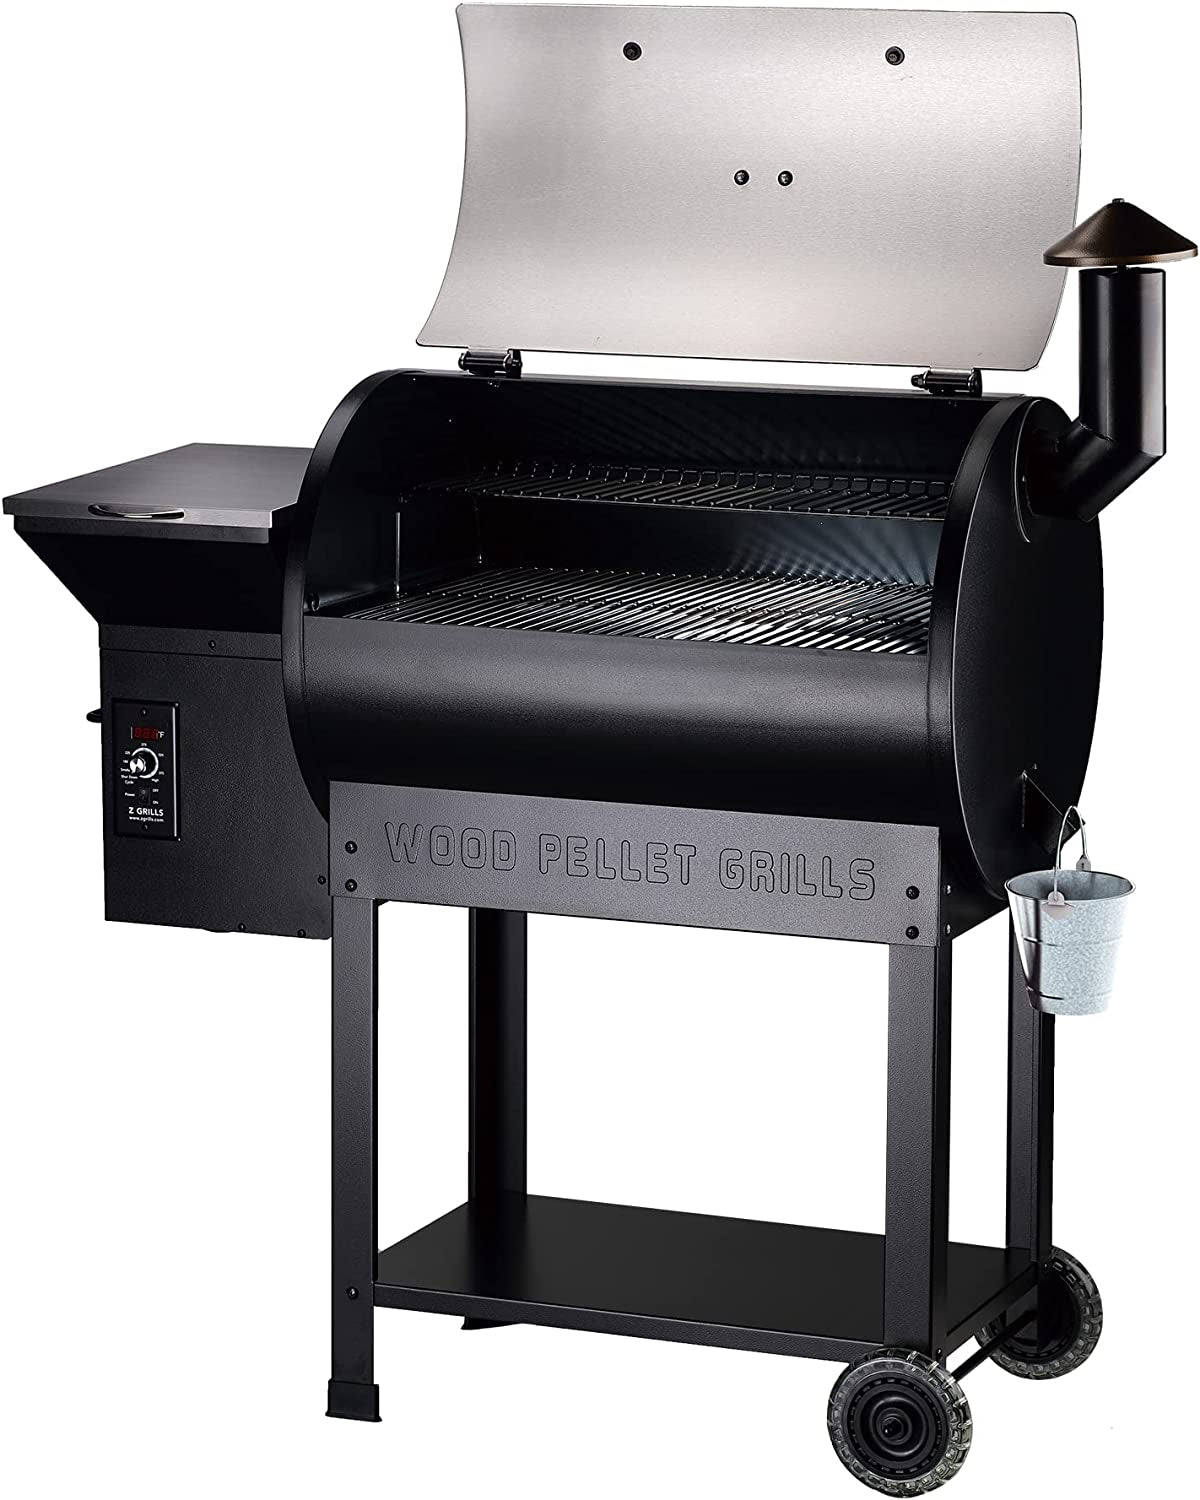 "Ultimate Outdoor Cooking Experience: 8 in 1 Wood Pellet Grill & Smoker with Auto Temperature Control, Massive 697 Sq in Cooking Area - Get the 7002E Now!"